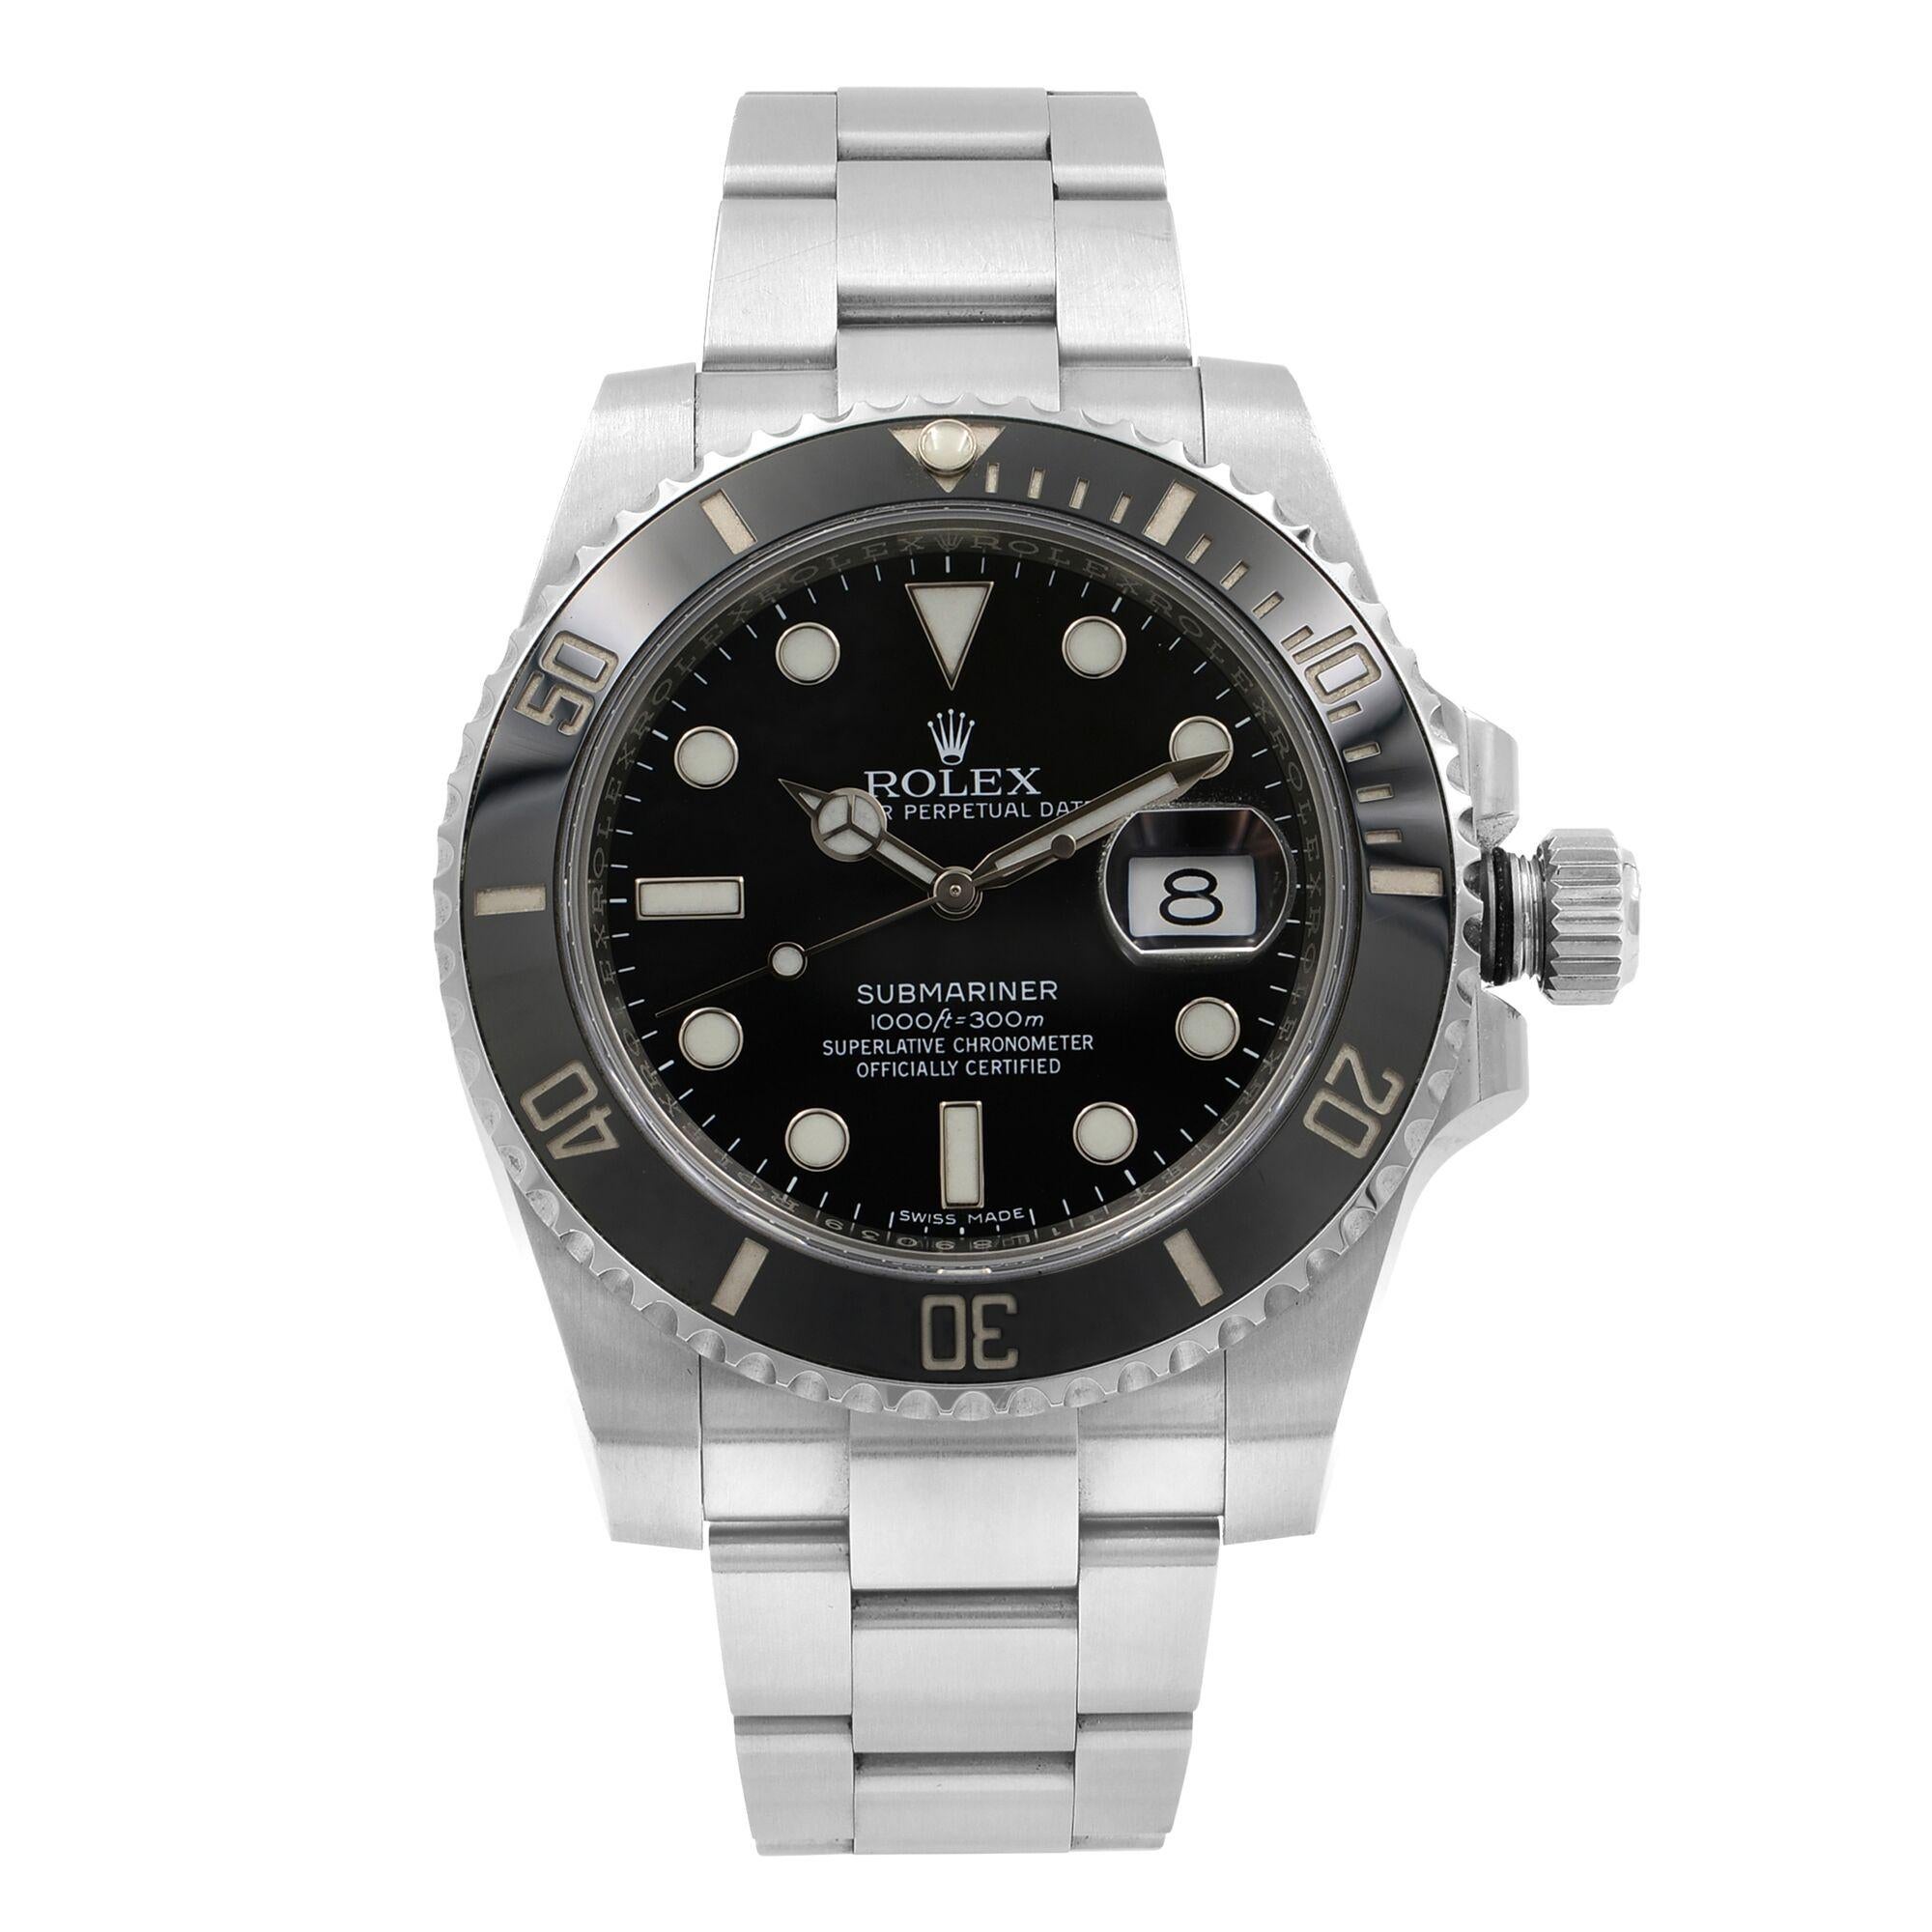 This pre-owned Rolex Submariner 116610LN is a beautiful men's timepiece that is powered by an automatic movement which is cased in a stainless steel case. It has a round shape face, date dial and has hand sticks & dots style markers. It is completed